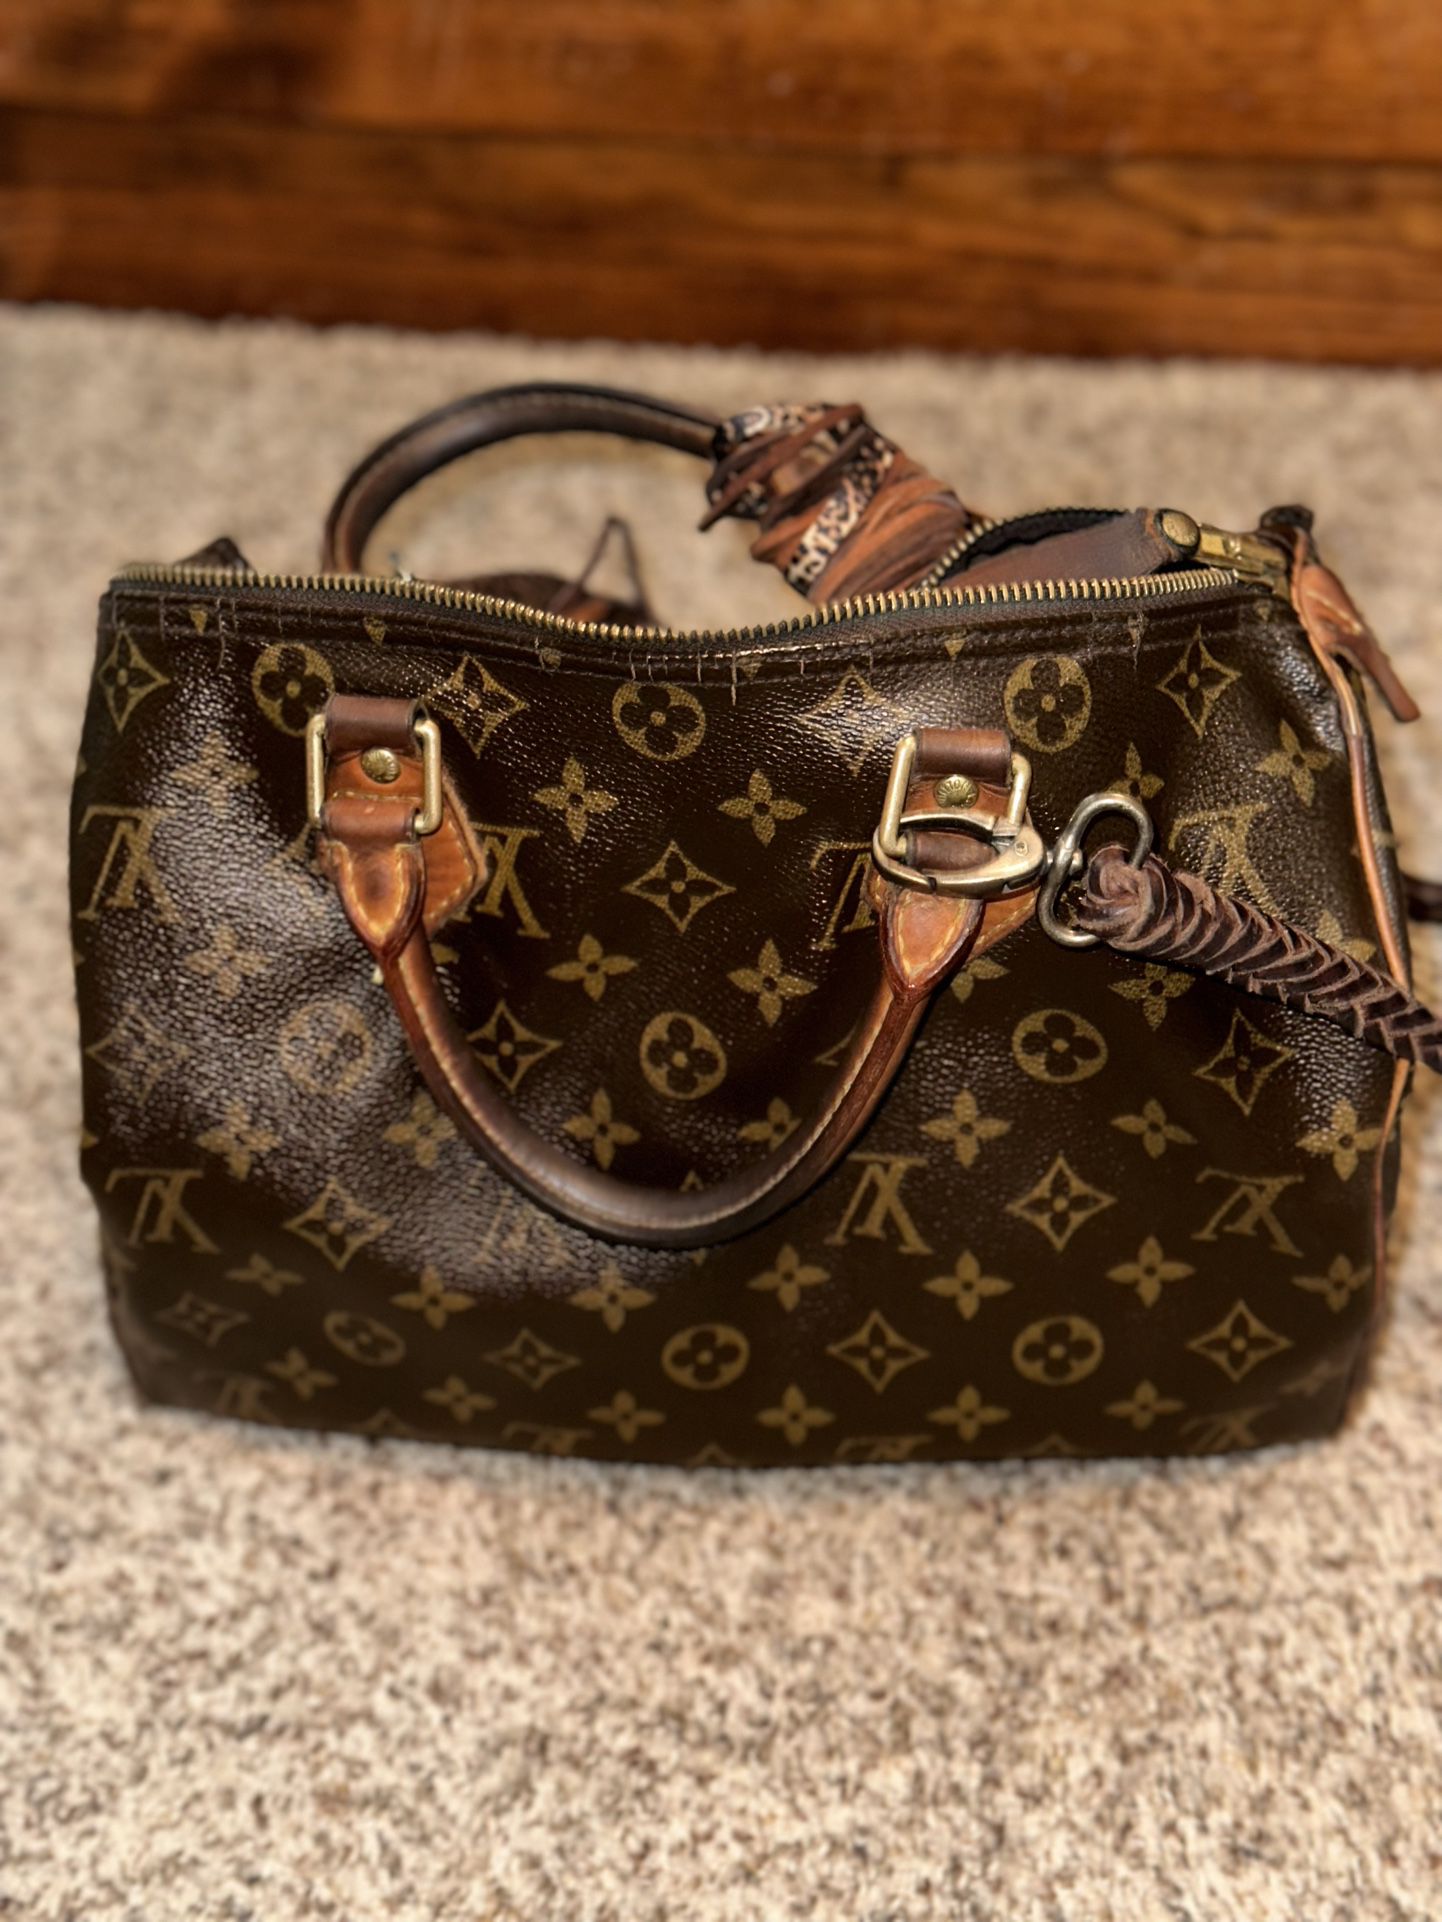 AUTHENTIC LV Vintage Boho Alma MM for Sale in Salinas, CA - OfferUp